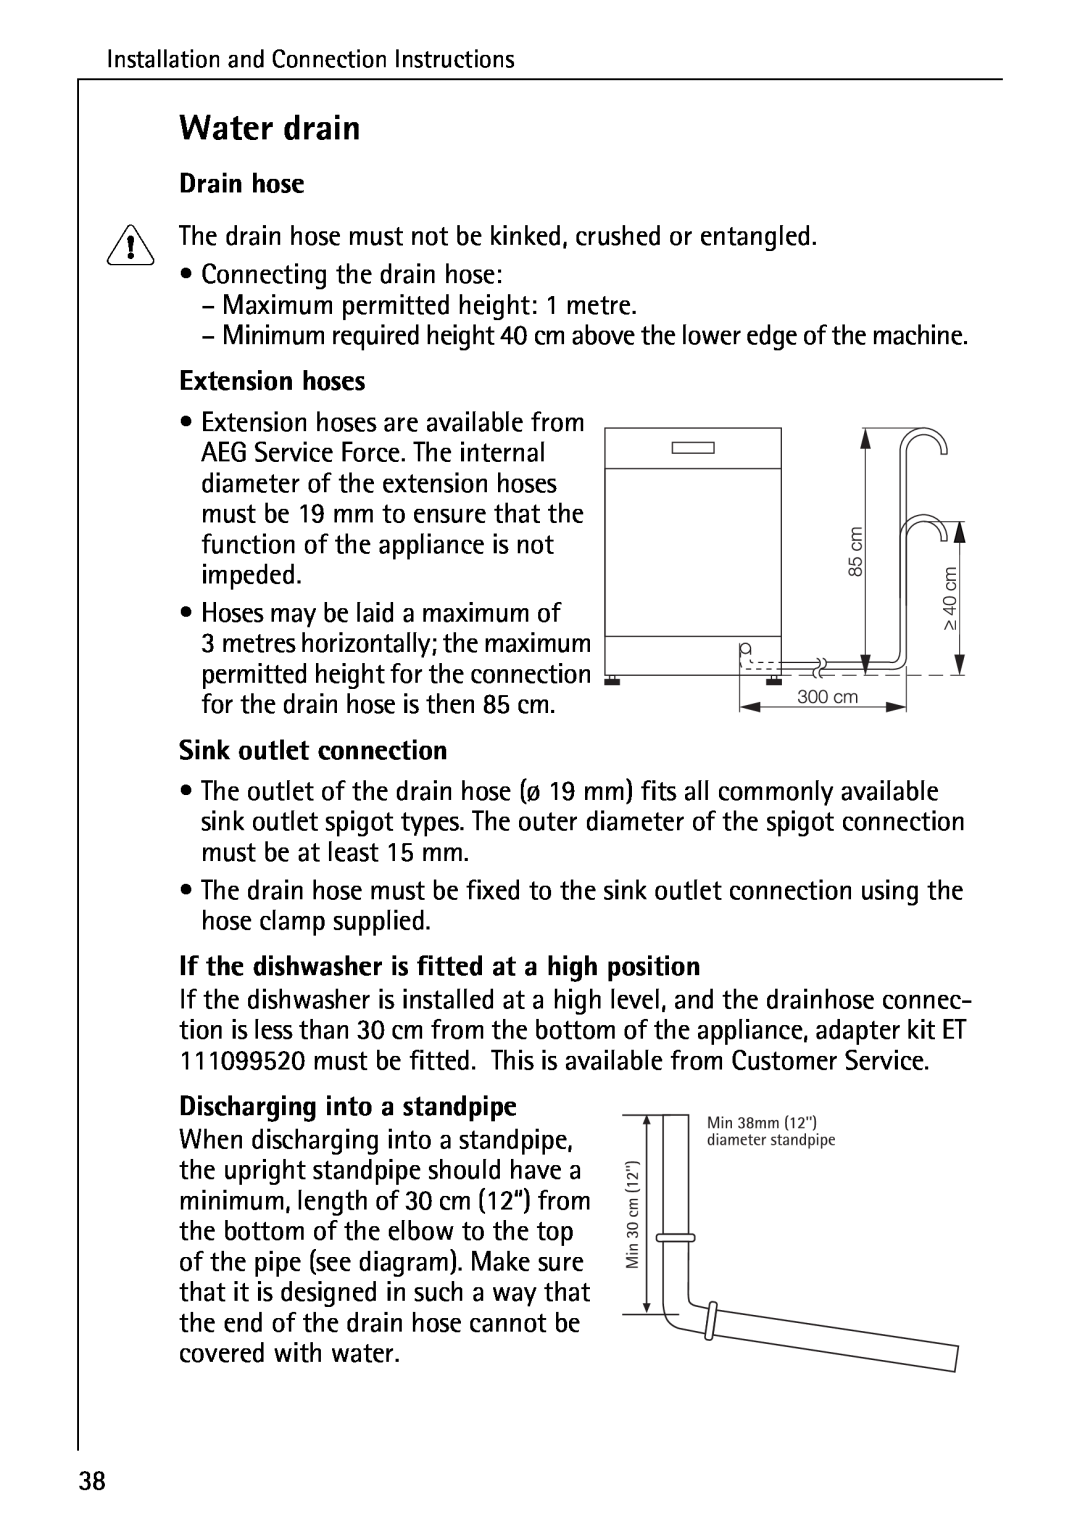 Electrolux 50610 manual Water drain, Drain hose, Extension hoses, Sink outlet connection, Discharging into a standpipe 